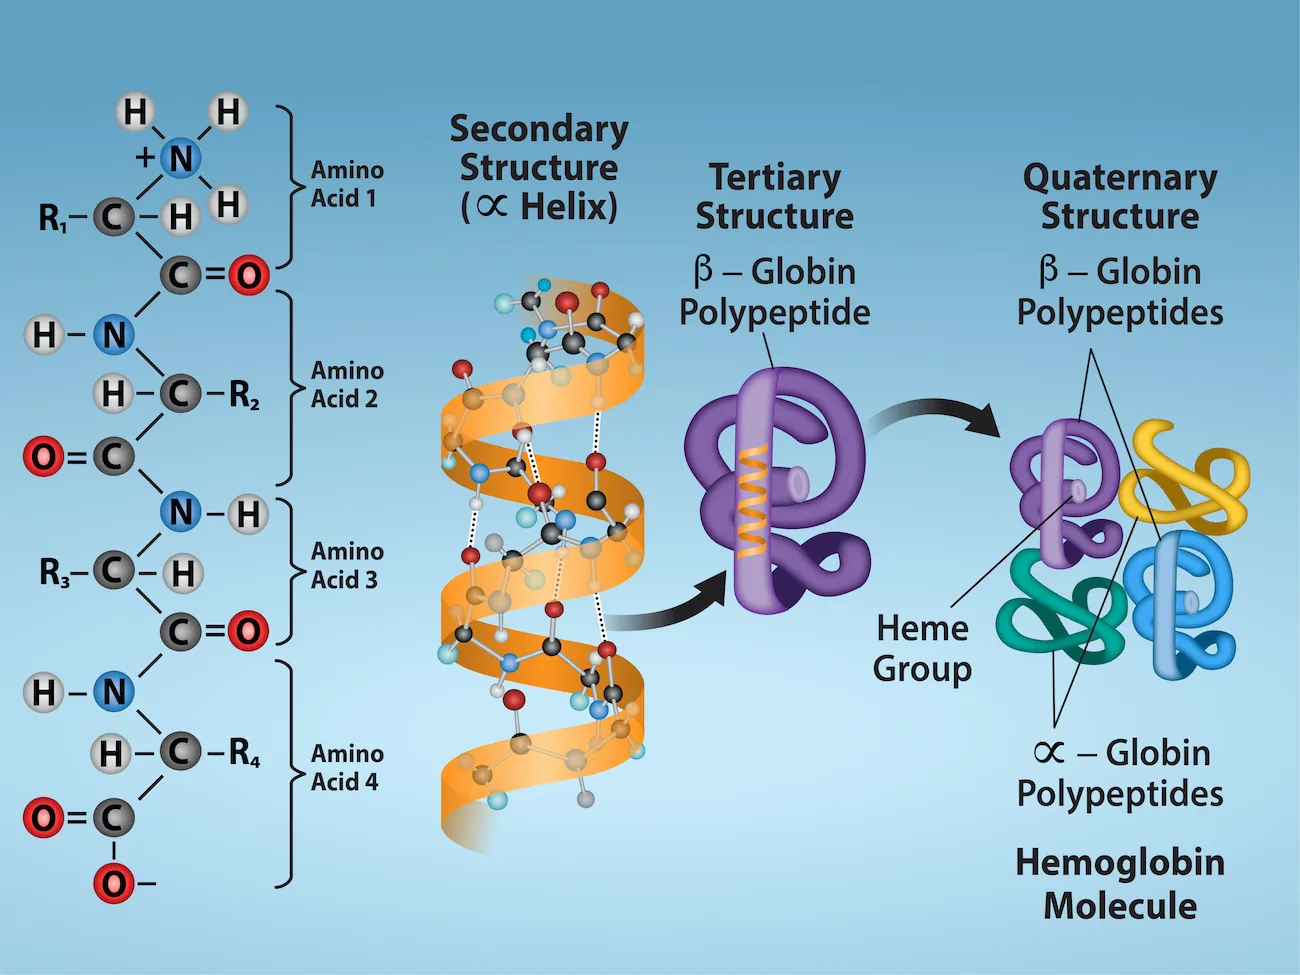 Shown are the four levels of protein structure. The primary structure is the amino acid sequence. Secondary structure is a regular folding pattern due to hydrogen bonding. Tertiary structure is the three-dimensional folding pattern of the protein due to interactions between amino acid side chains. Quaternary structure is the interaction of two or more polypeptide chains.